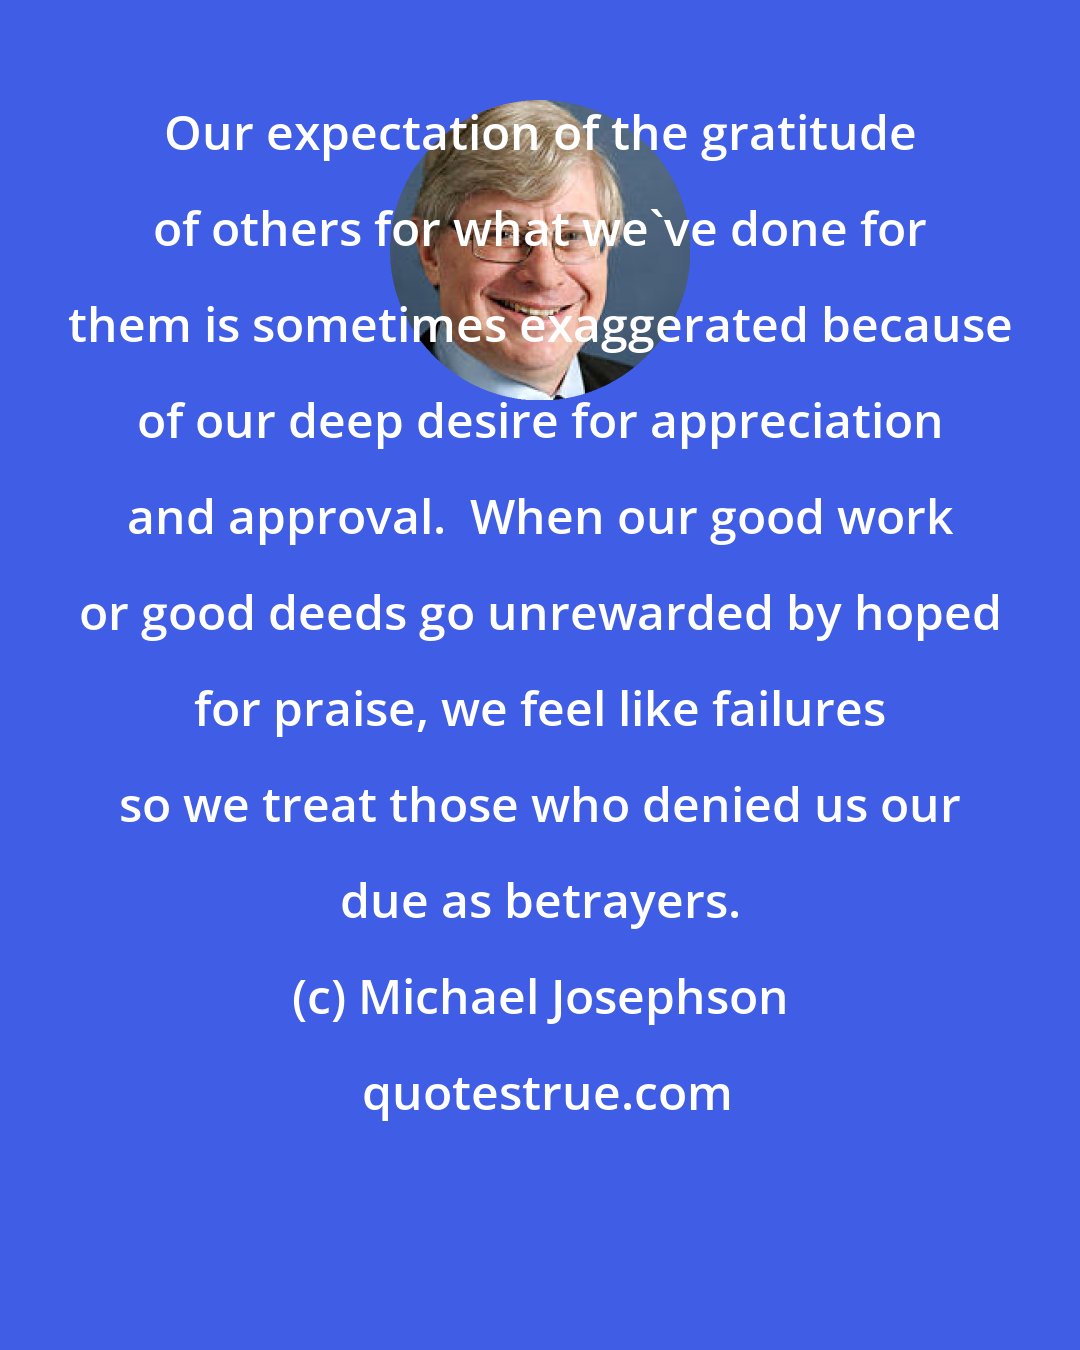 Michael Josephson: Our expectation of the gratitude of others for what we've done for them is sometimes exaggerated because of our deep desire for appreciation and approval.  When our good work or good deeds go unrewarded by hoped for praise, we feel like failures so we treat those who denied us our due as betrayers.